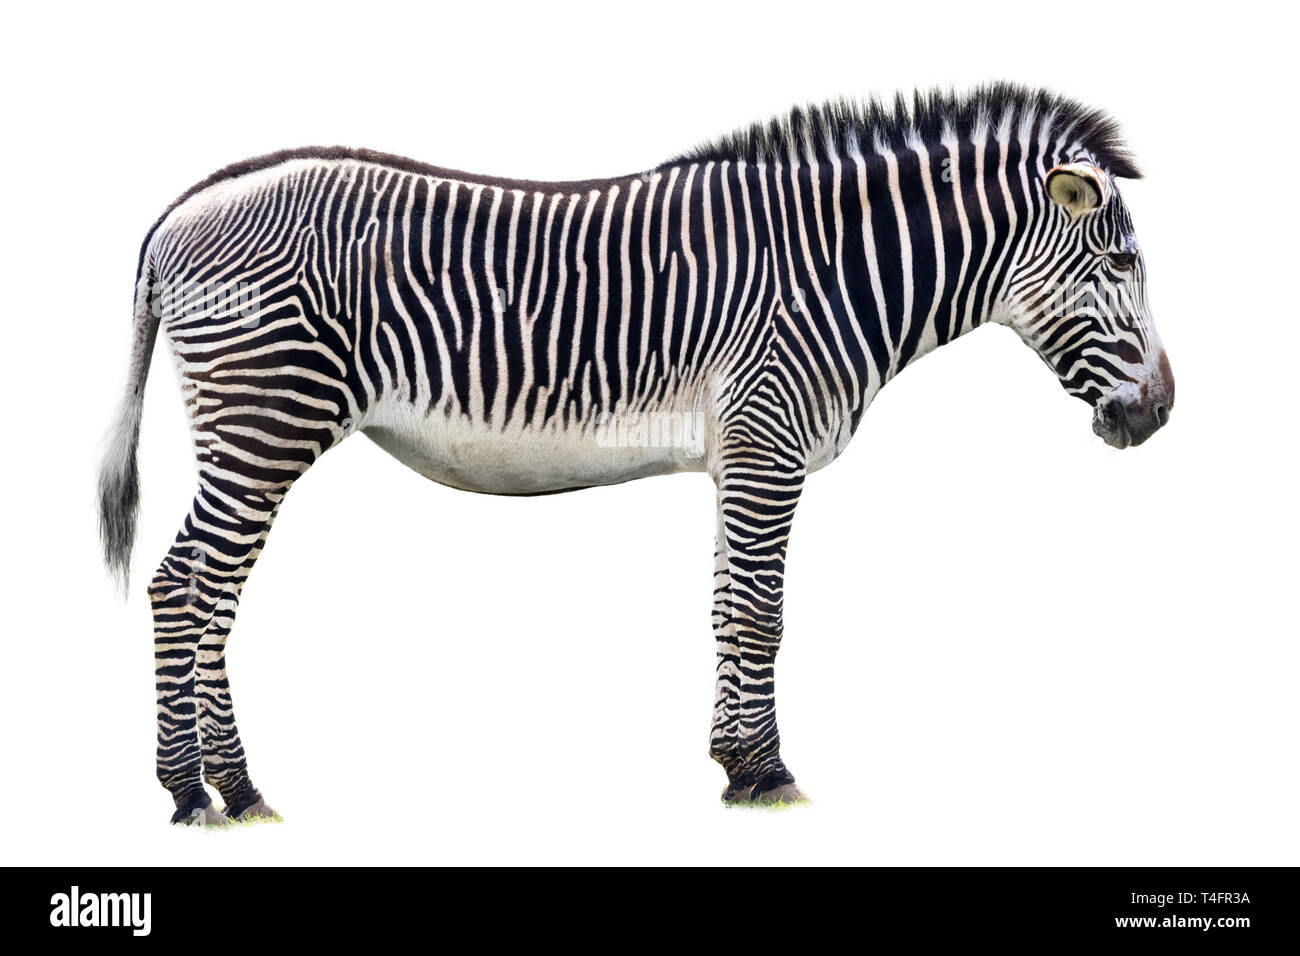 Grevys zebra isolated on white backgorund. This largest of  the zebra species and is endangered. Found in the savannahs and grasslands of northern Ken Stock Photo